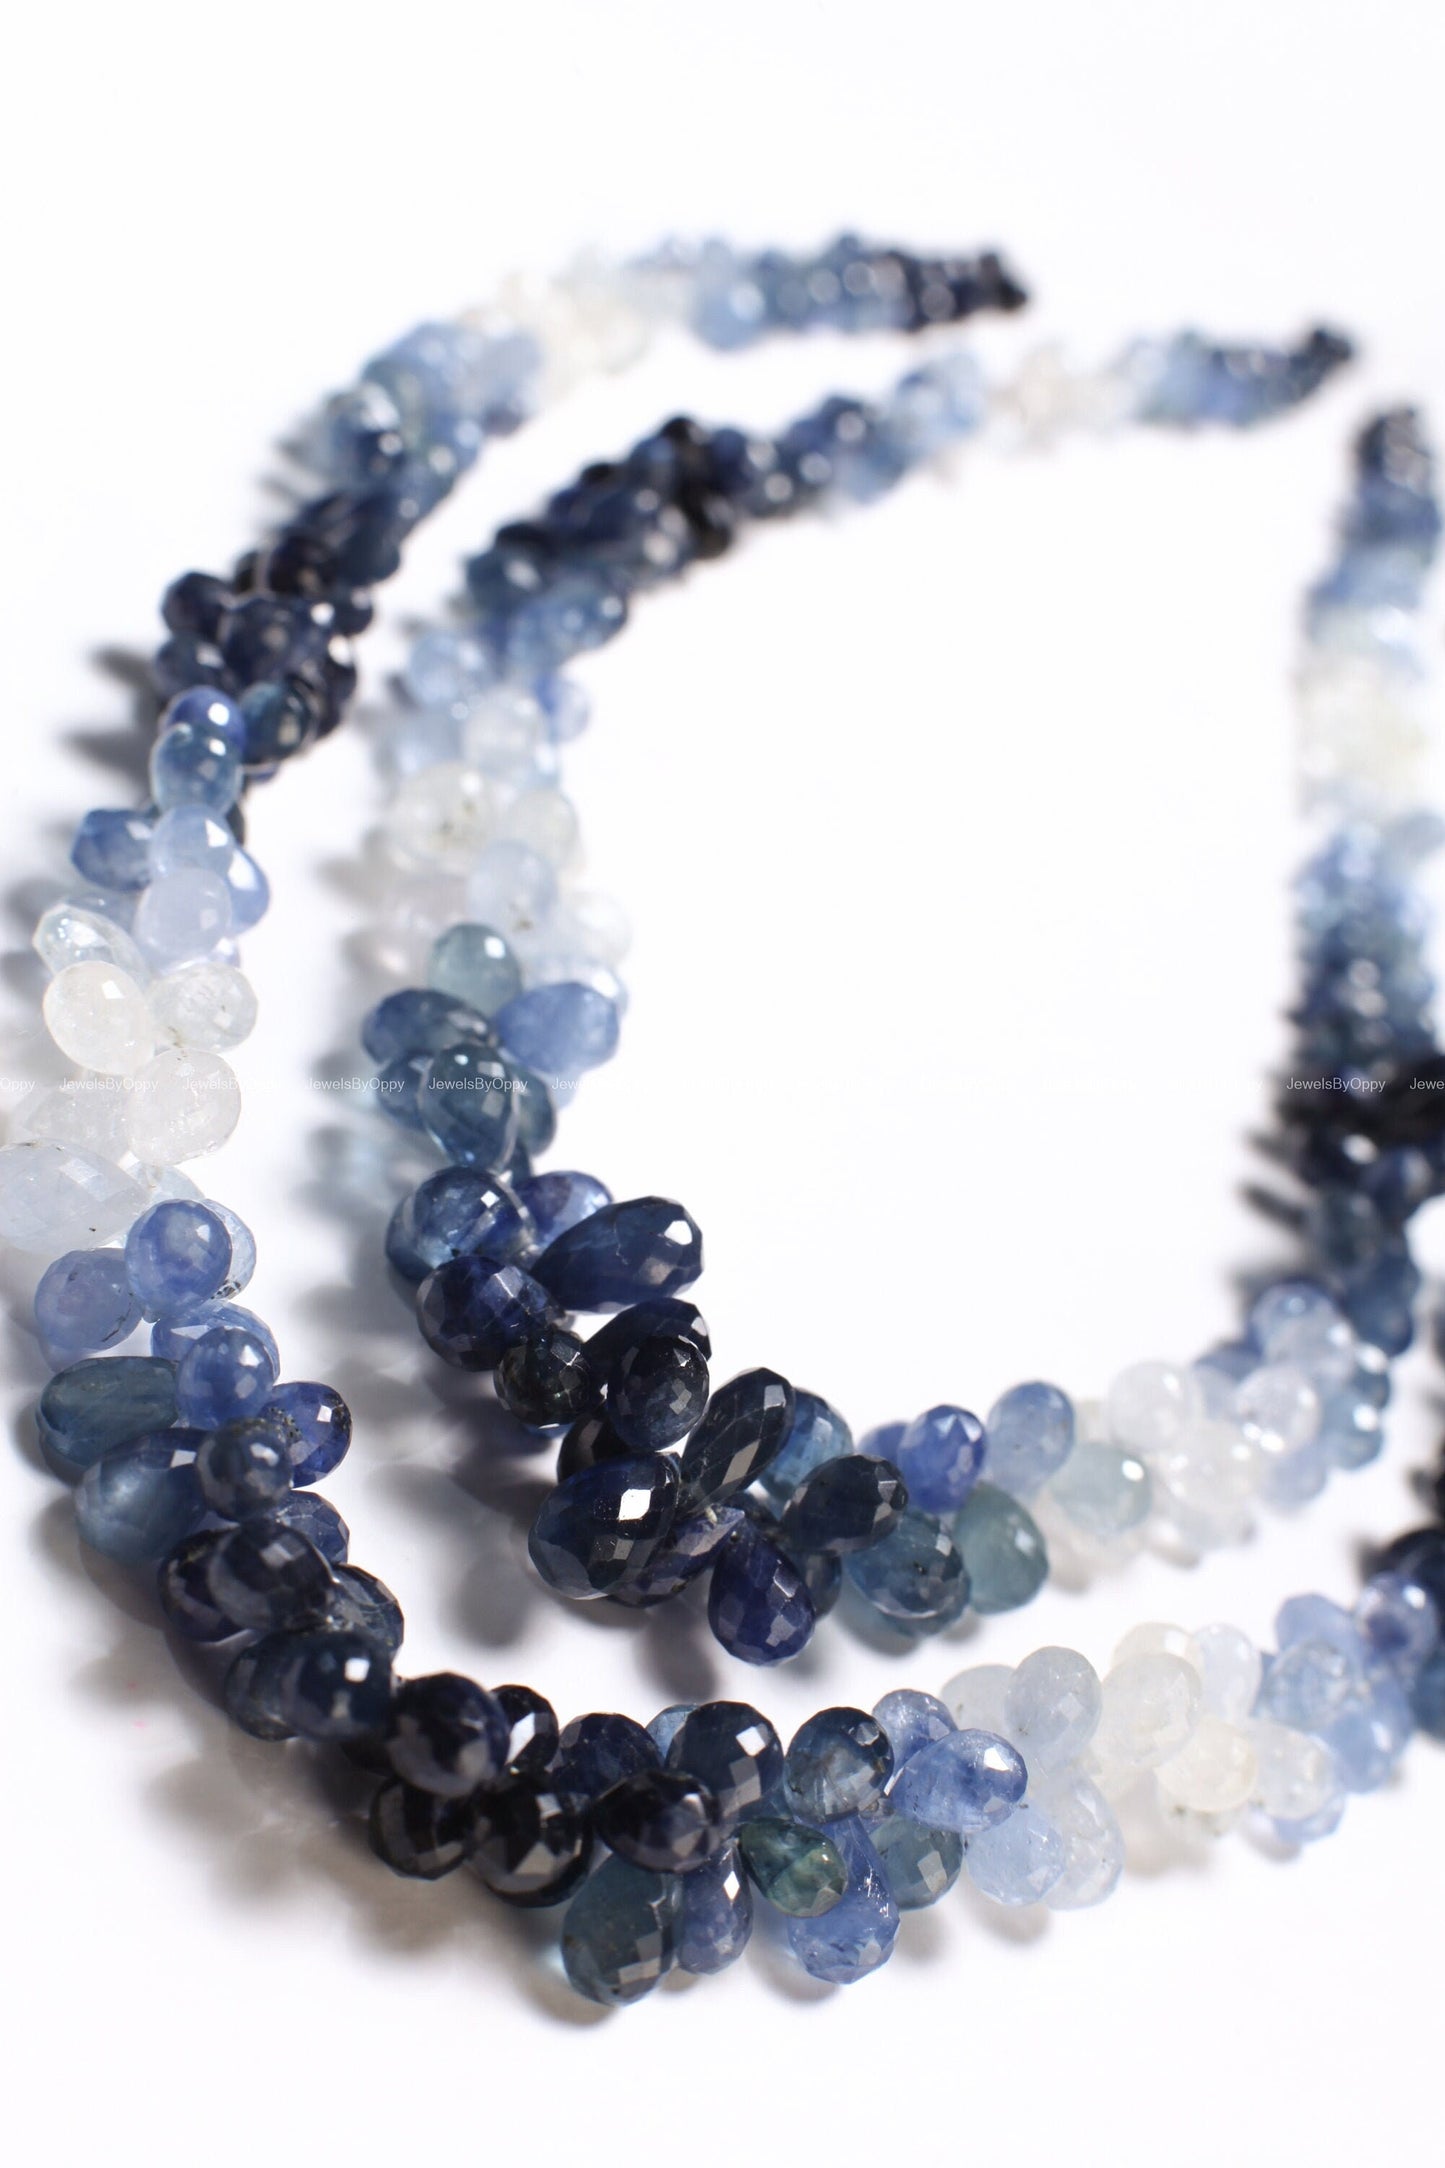 Ombre Sapphire drop, Natural Ombre Blue Sapphire Graduated Faceted Briolette 3x5-5x9mm round Teardrop Gemstone Jewelry Beads by pieces